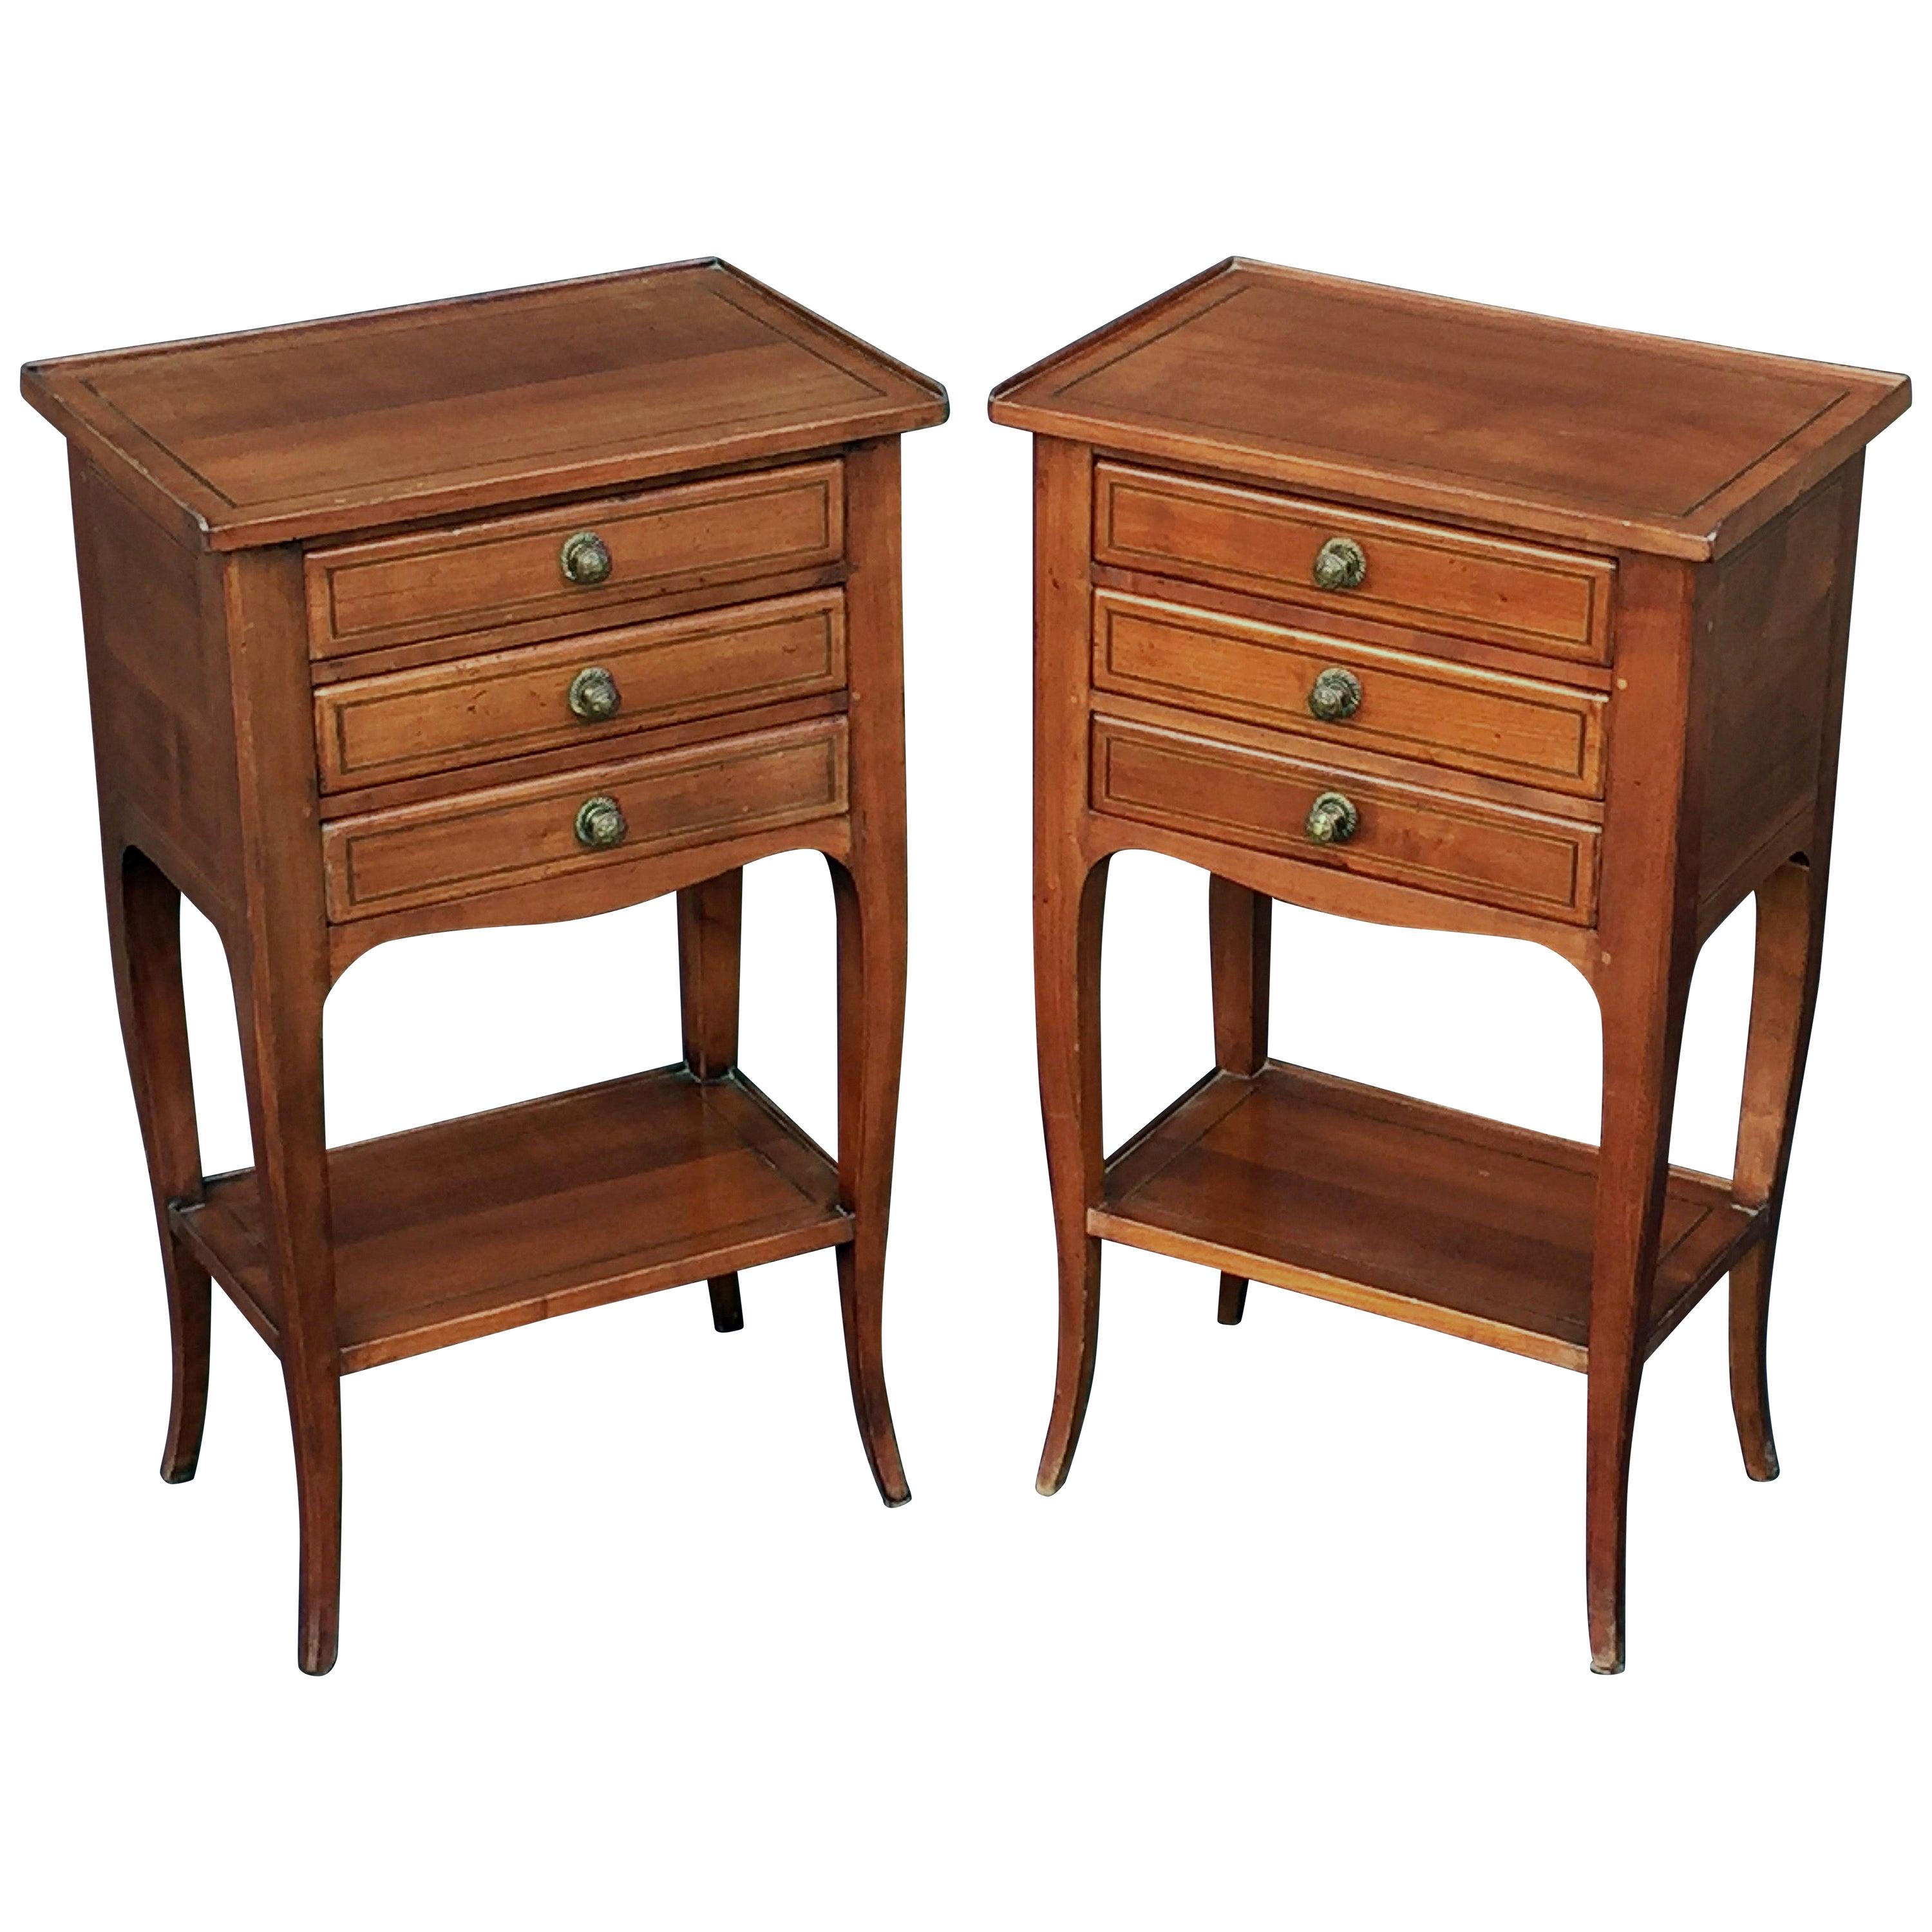 French Nightstands or Side Tables of Chestnut 'Priced as a Pair'